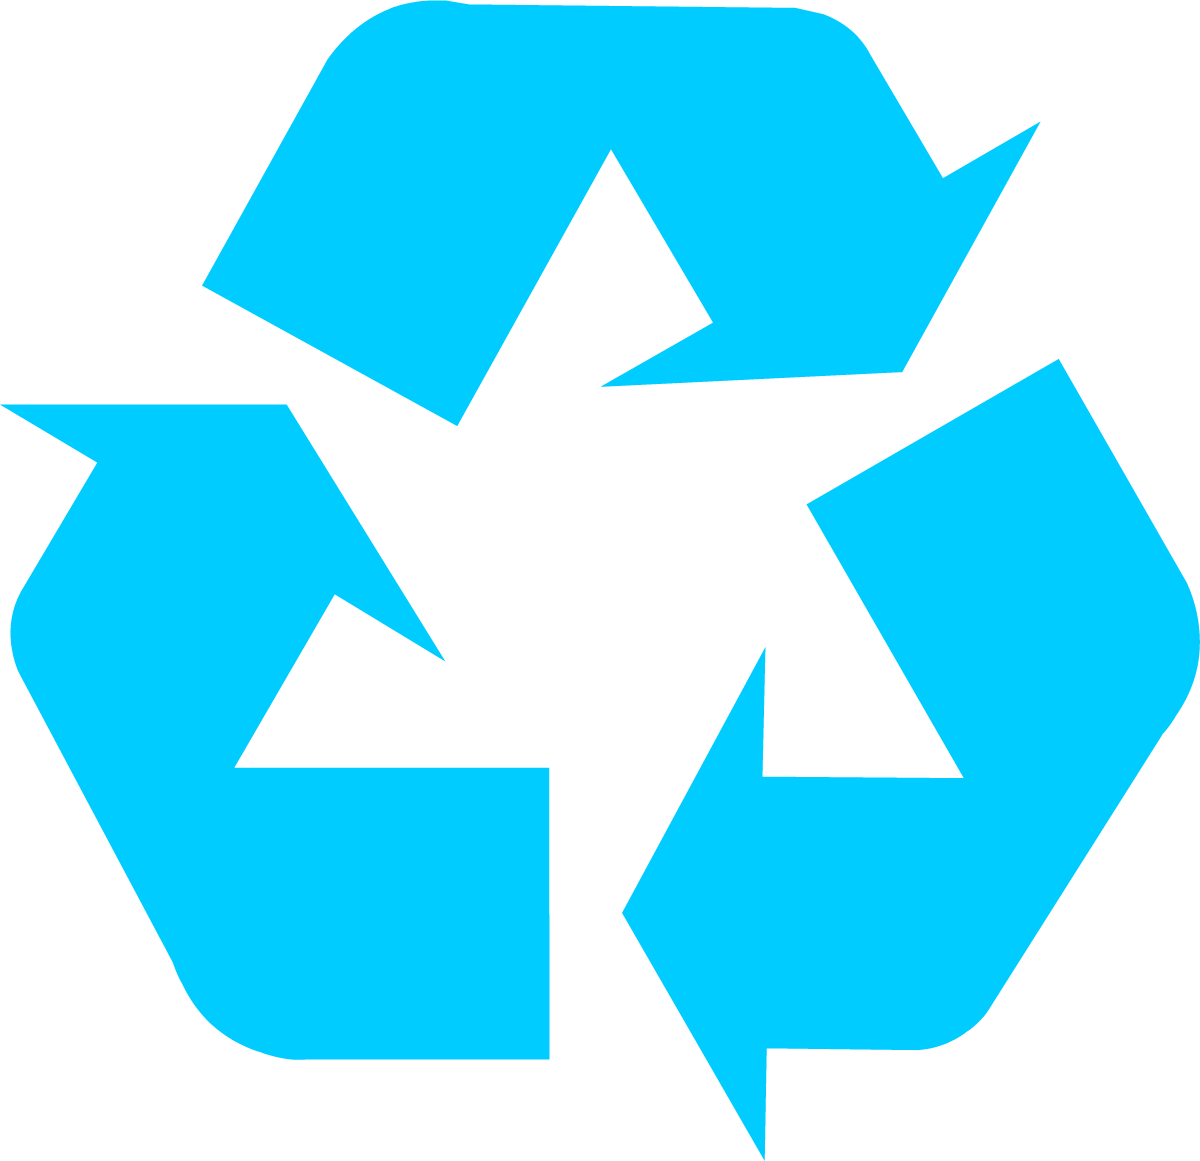 Recycle Bin Logo PNG Image Transparent Background